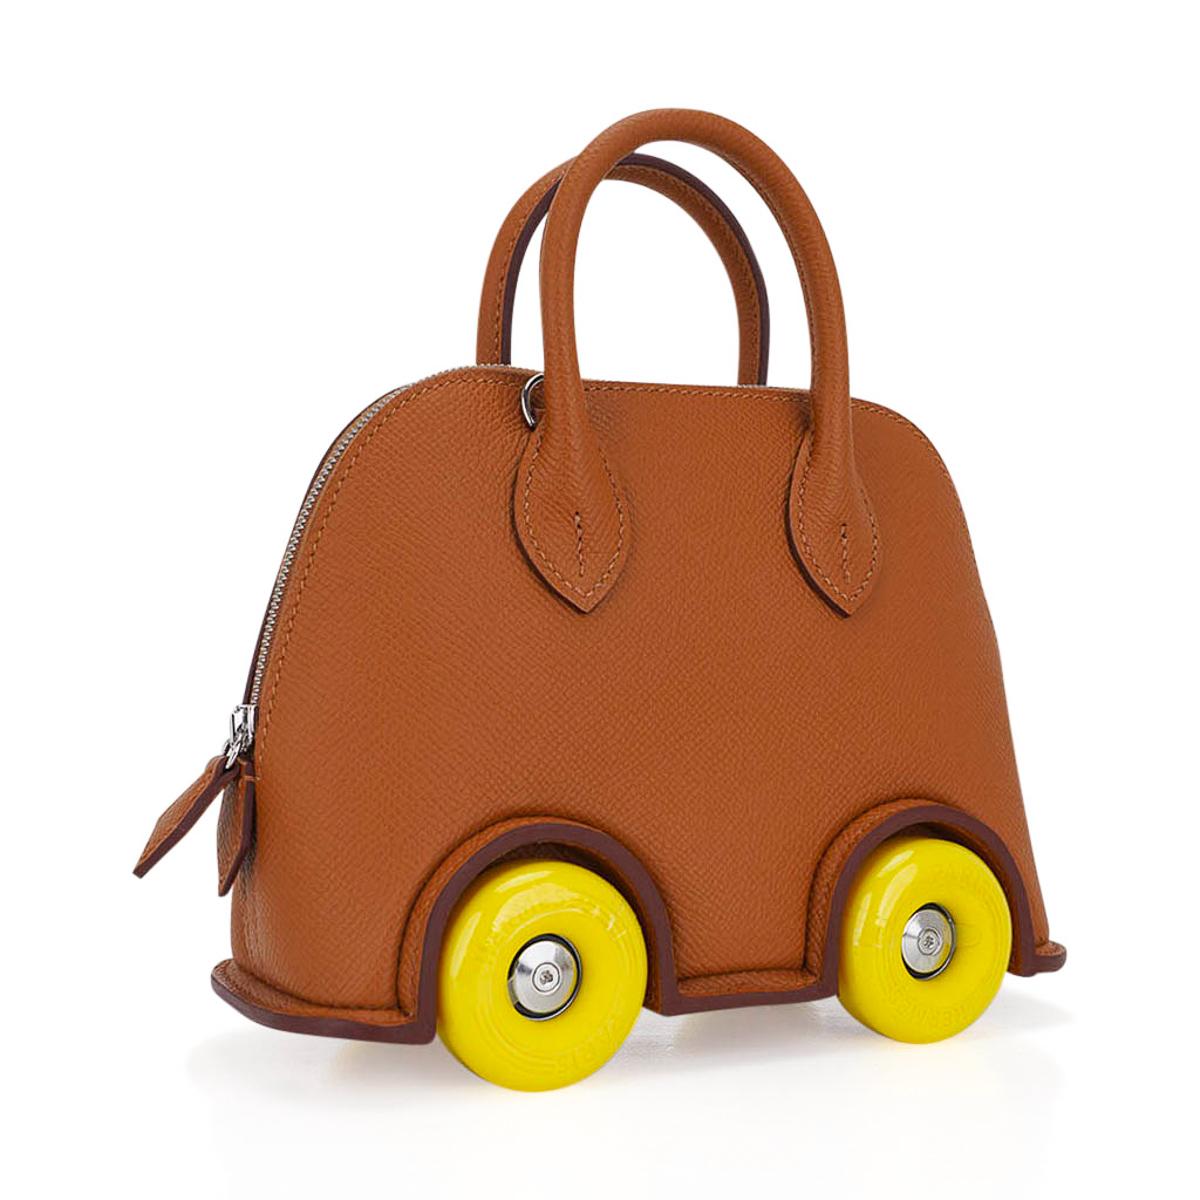 Mightychic offers a Limited Edition Hermes Bolide on Wheels featured in Gold.
Created for the re-opening of the Madison Avenue Hermes Store in 2022.
A true nod to the creative whimsy and innovative imagination of Hermes.
This rare treasure is a must